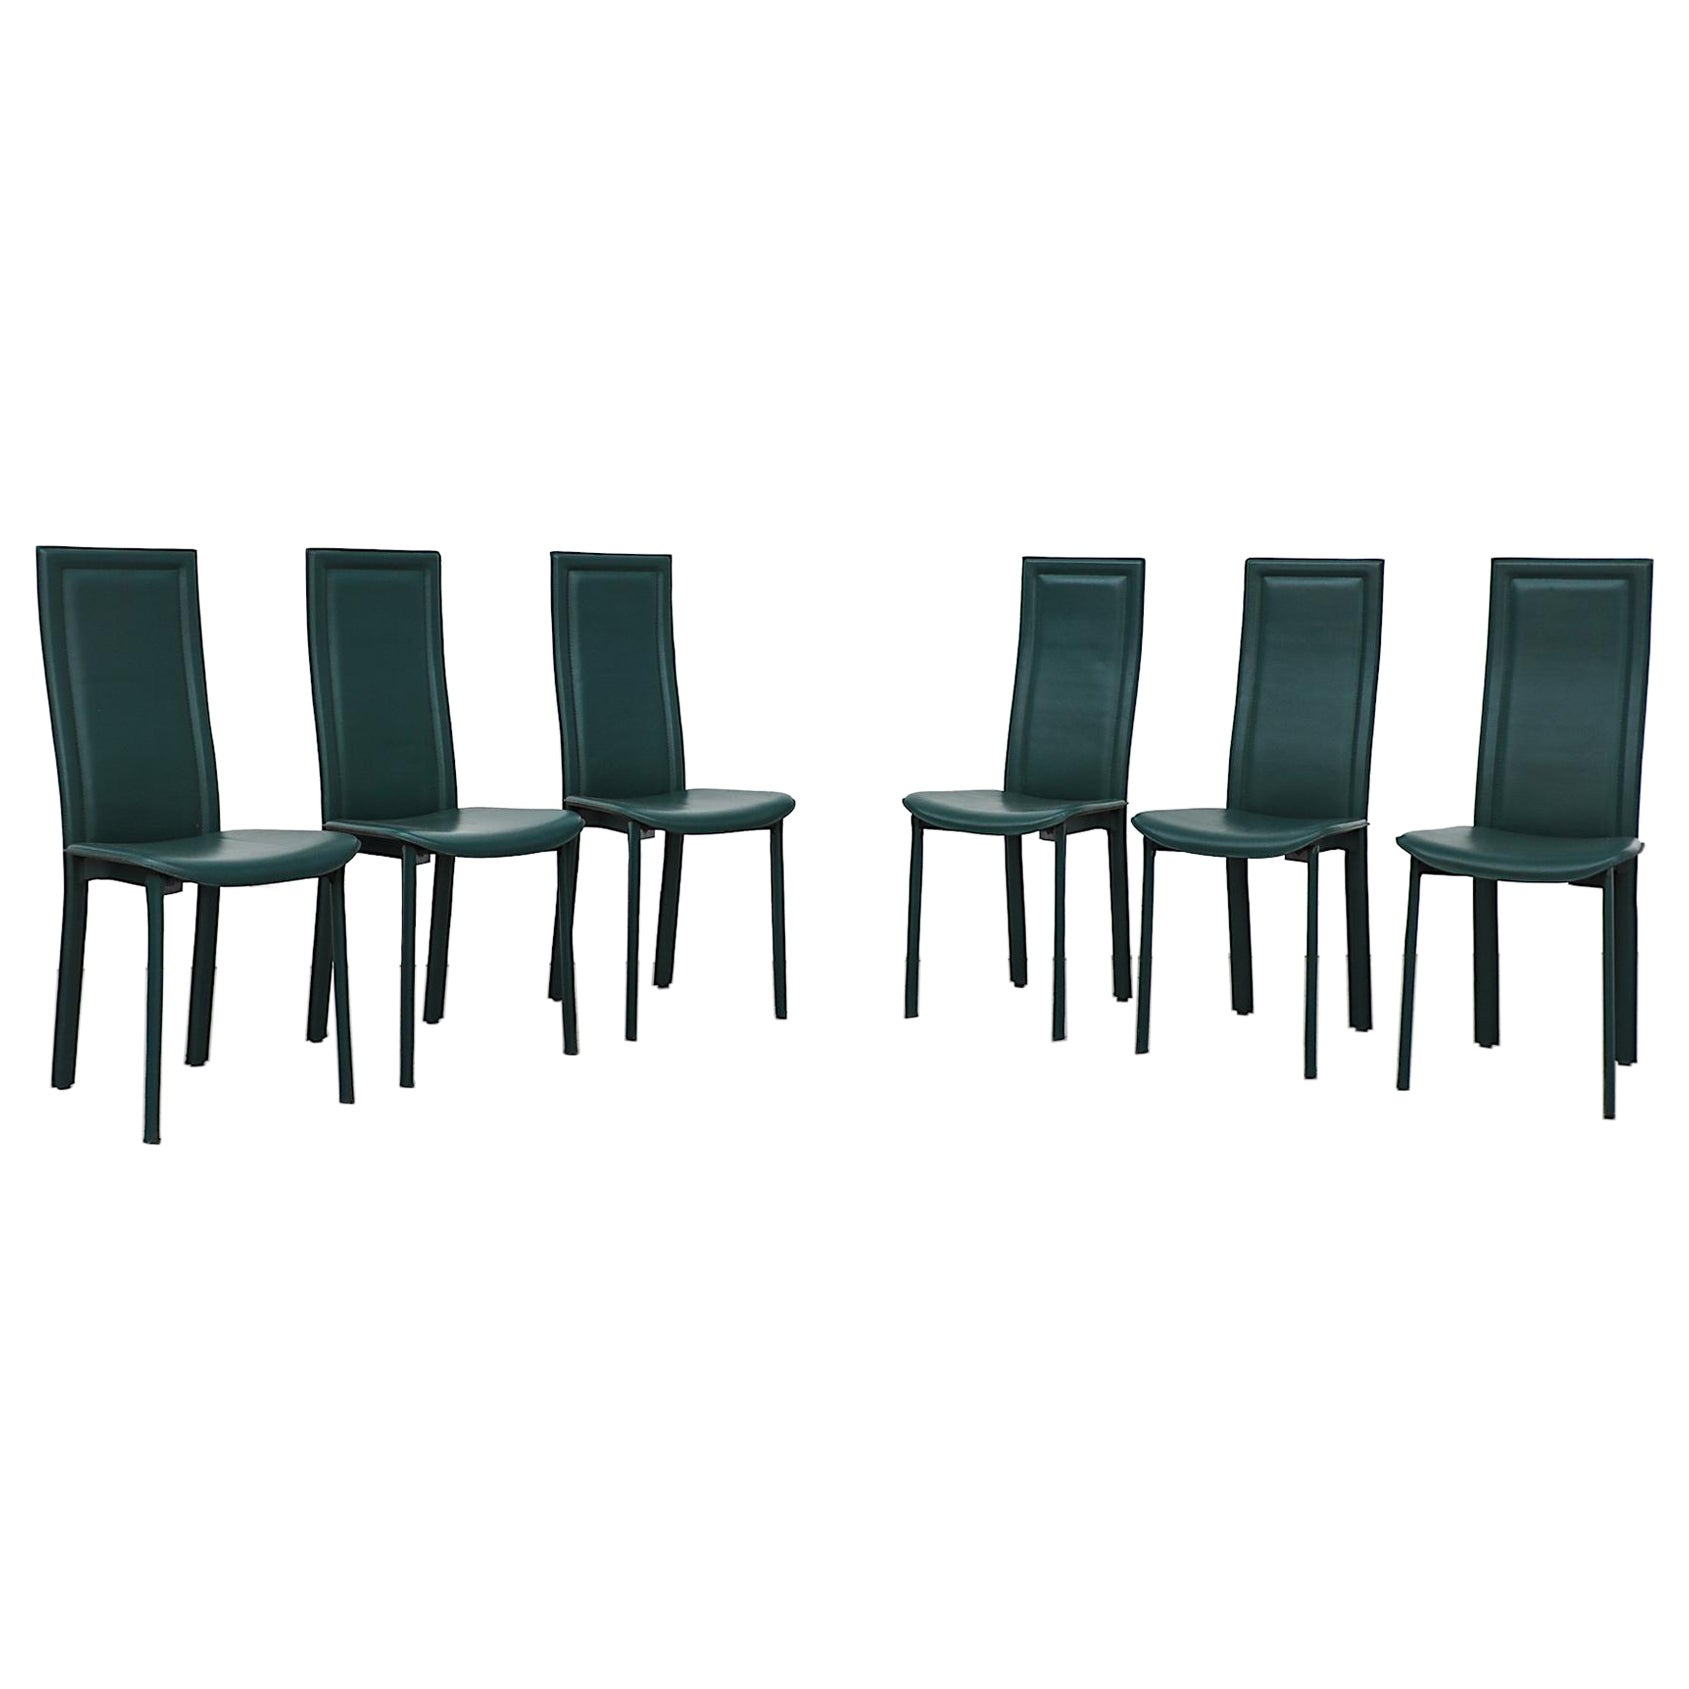 Set of 6 Cattelan Italia Green Leather High Back Chairs For Sale